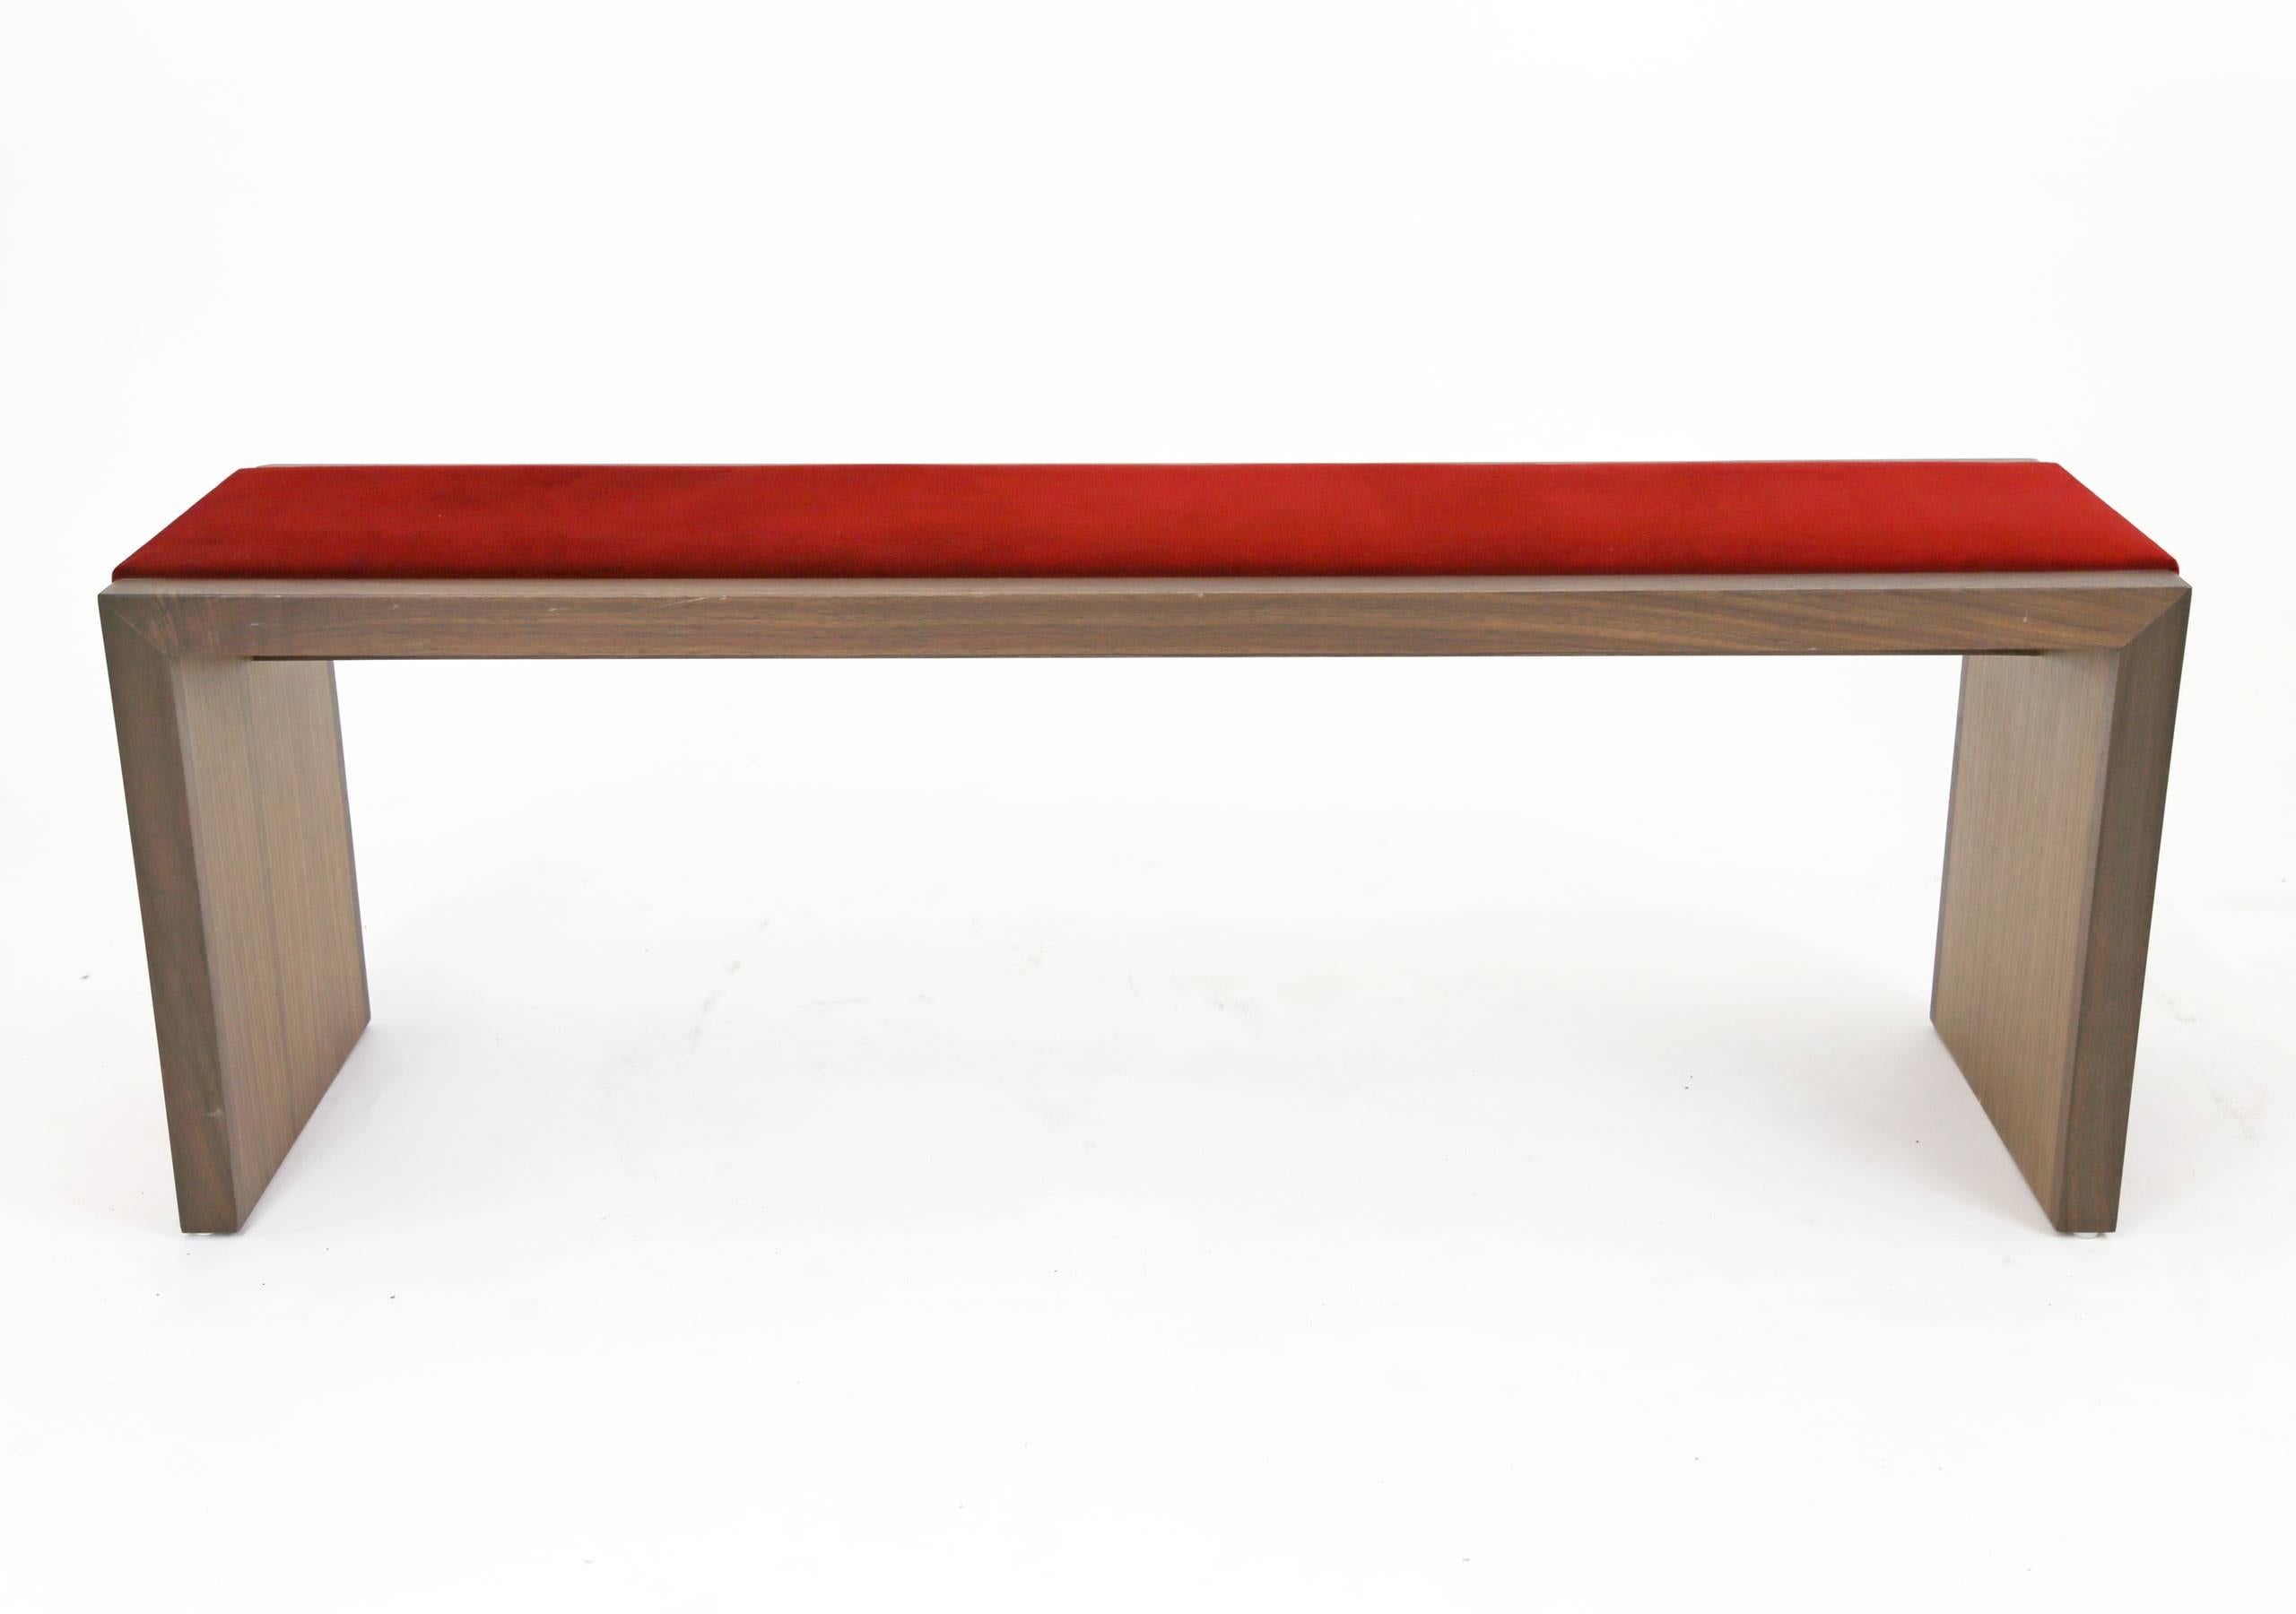 Walnut bench with a red velvet strip running across the seat and down both legs for a luxurious and interesting touch. 

Floor model made in Brooklyn by Sentient, in like new condition.

Dimensions 48ʺ W × 14.0ʺ D × 18.0ʺ H.